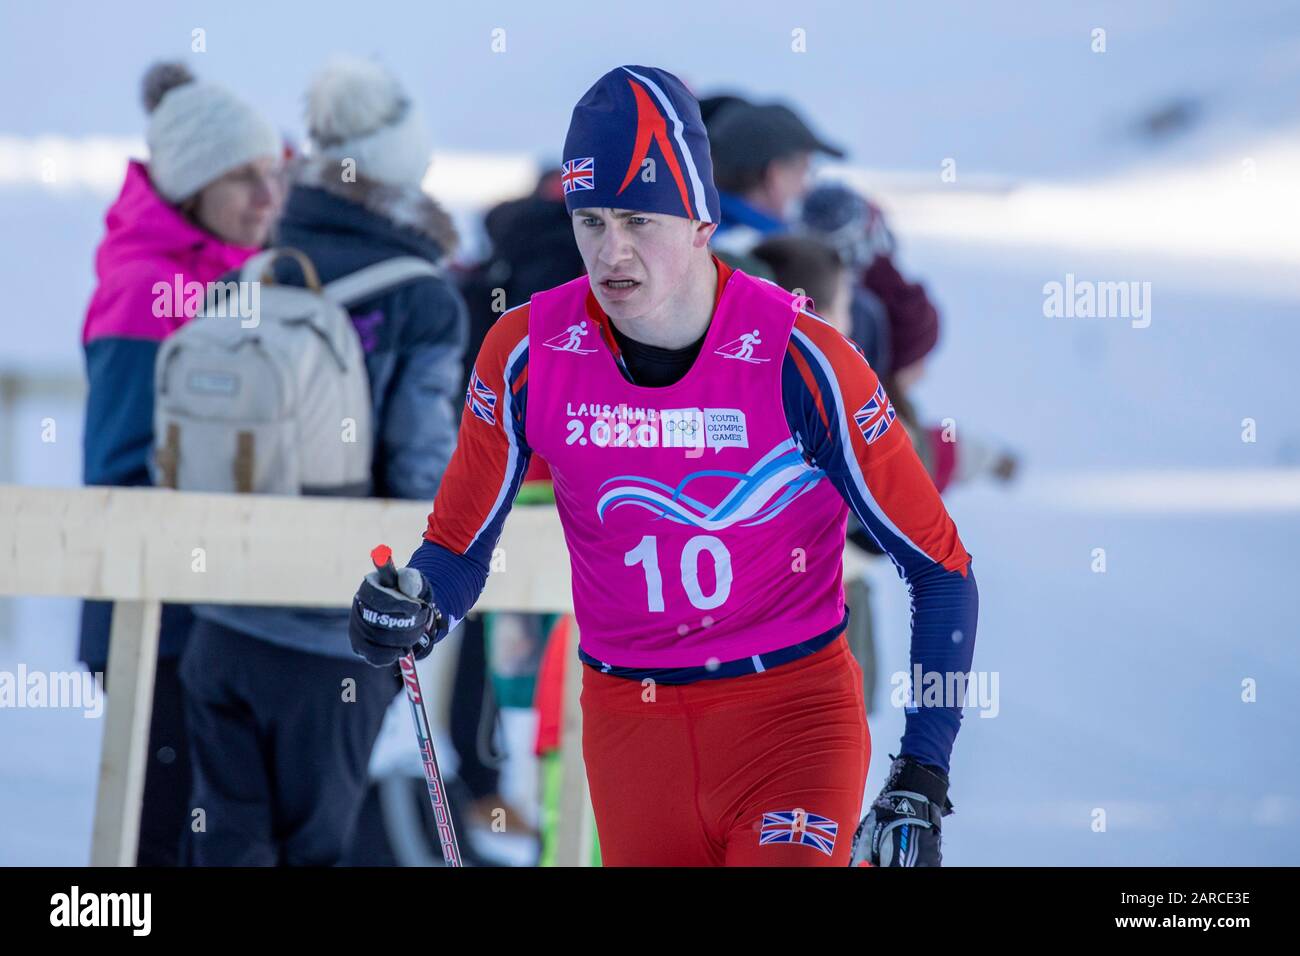 Team GB’s James Slimon (17) at the Cross-Country Skiing Men’s 10km Classic during the Lausanne 2020 Youth Olympic Games on the 21st January 2020. Stock Photo